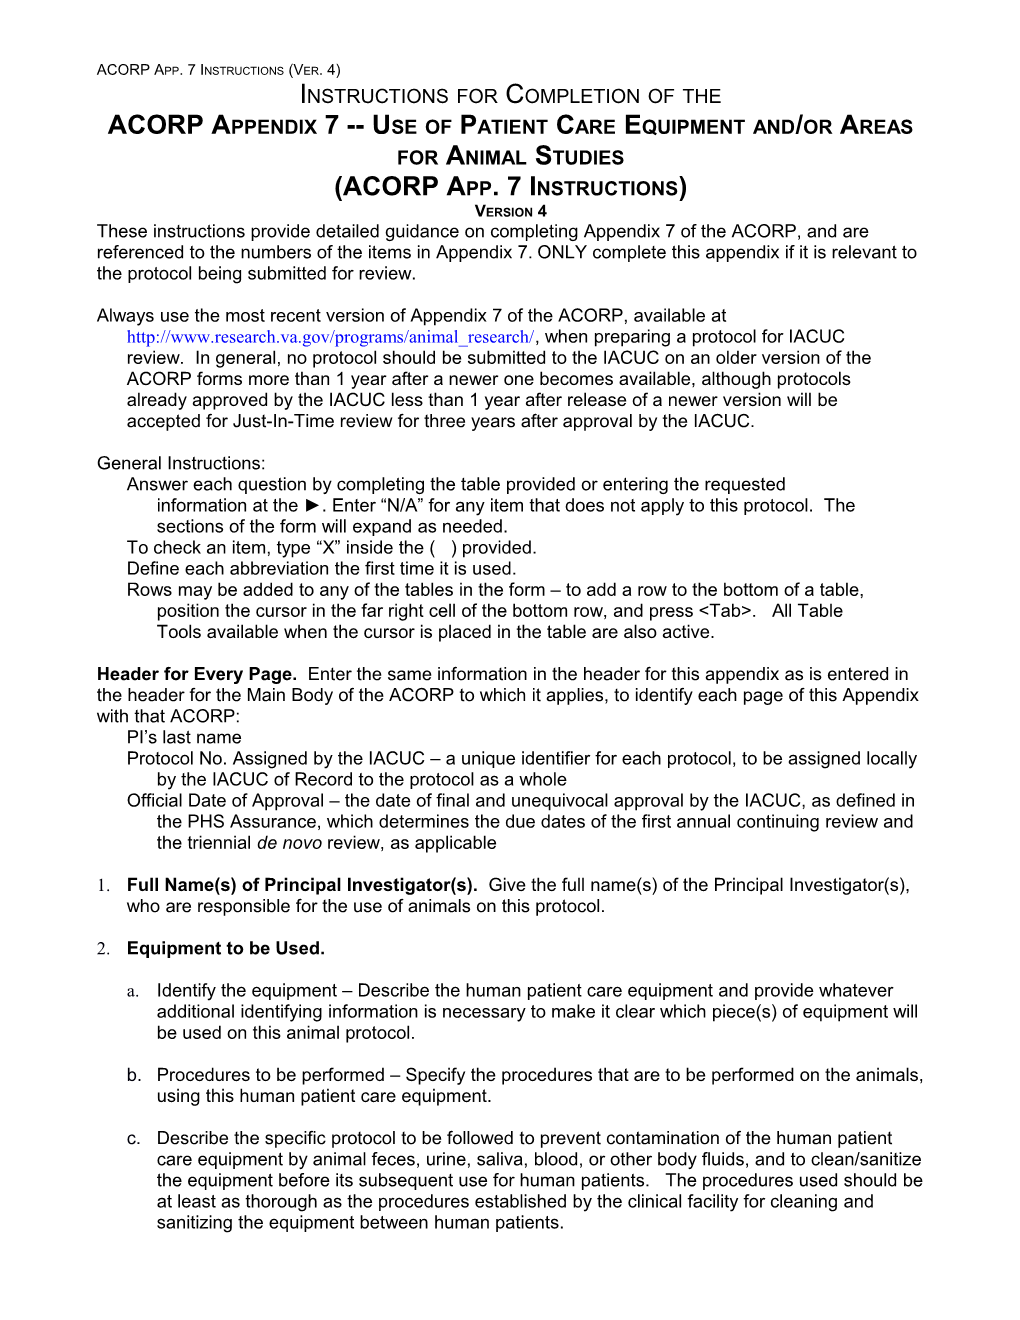 ACORP Appendix 7 Use of Patient Care Equipment And/Or Areas